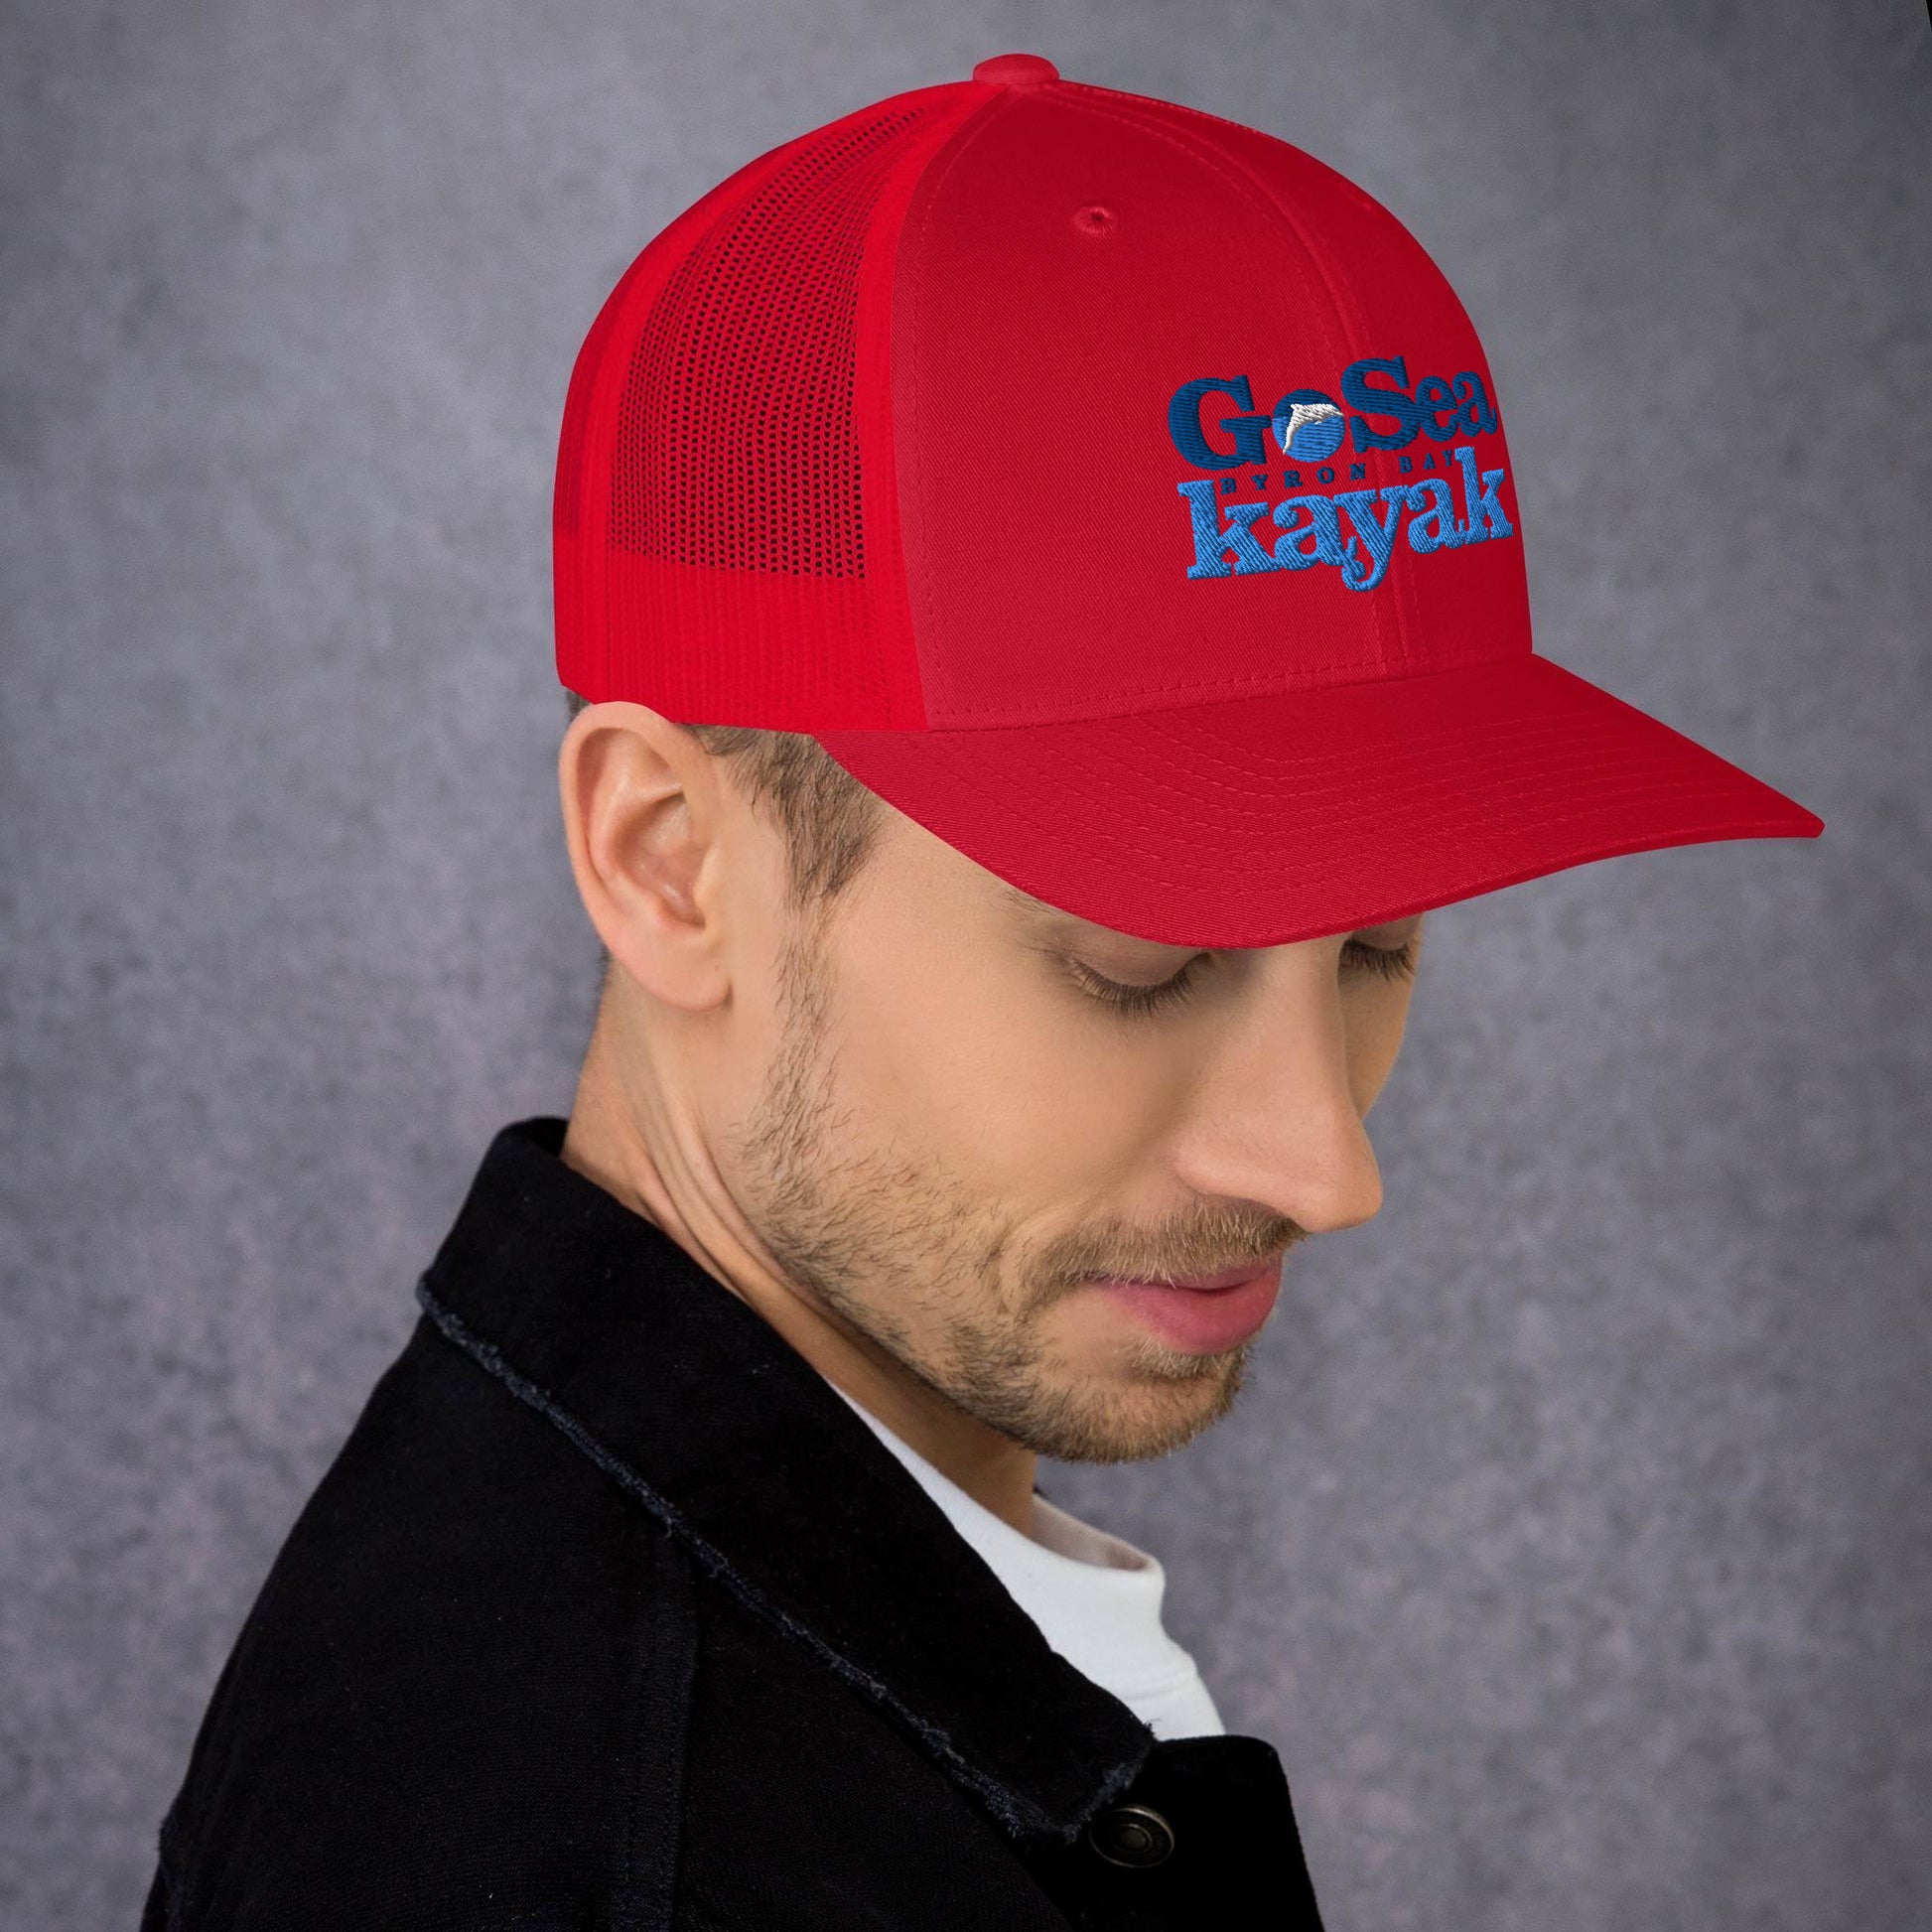  Trucker Cap - Red - Side view - being warn by man with his head down - Go Sea Kayak Byron Bay logo on front - Genuine Byron Bay Merchandise | Produced by Go Sea Kayak Byron Bay 